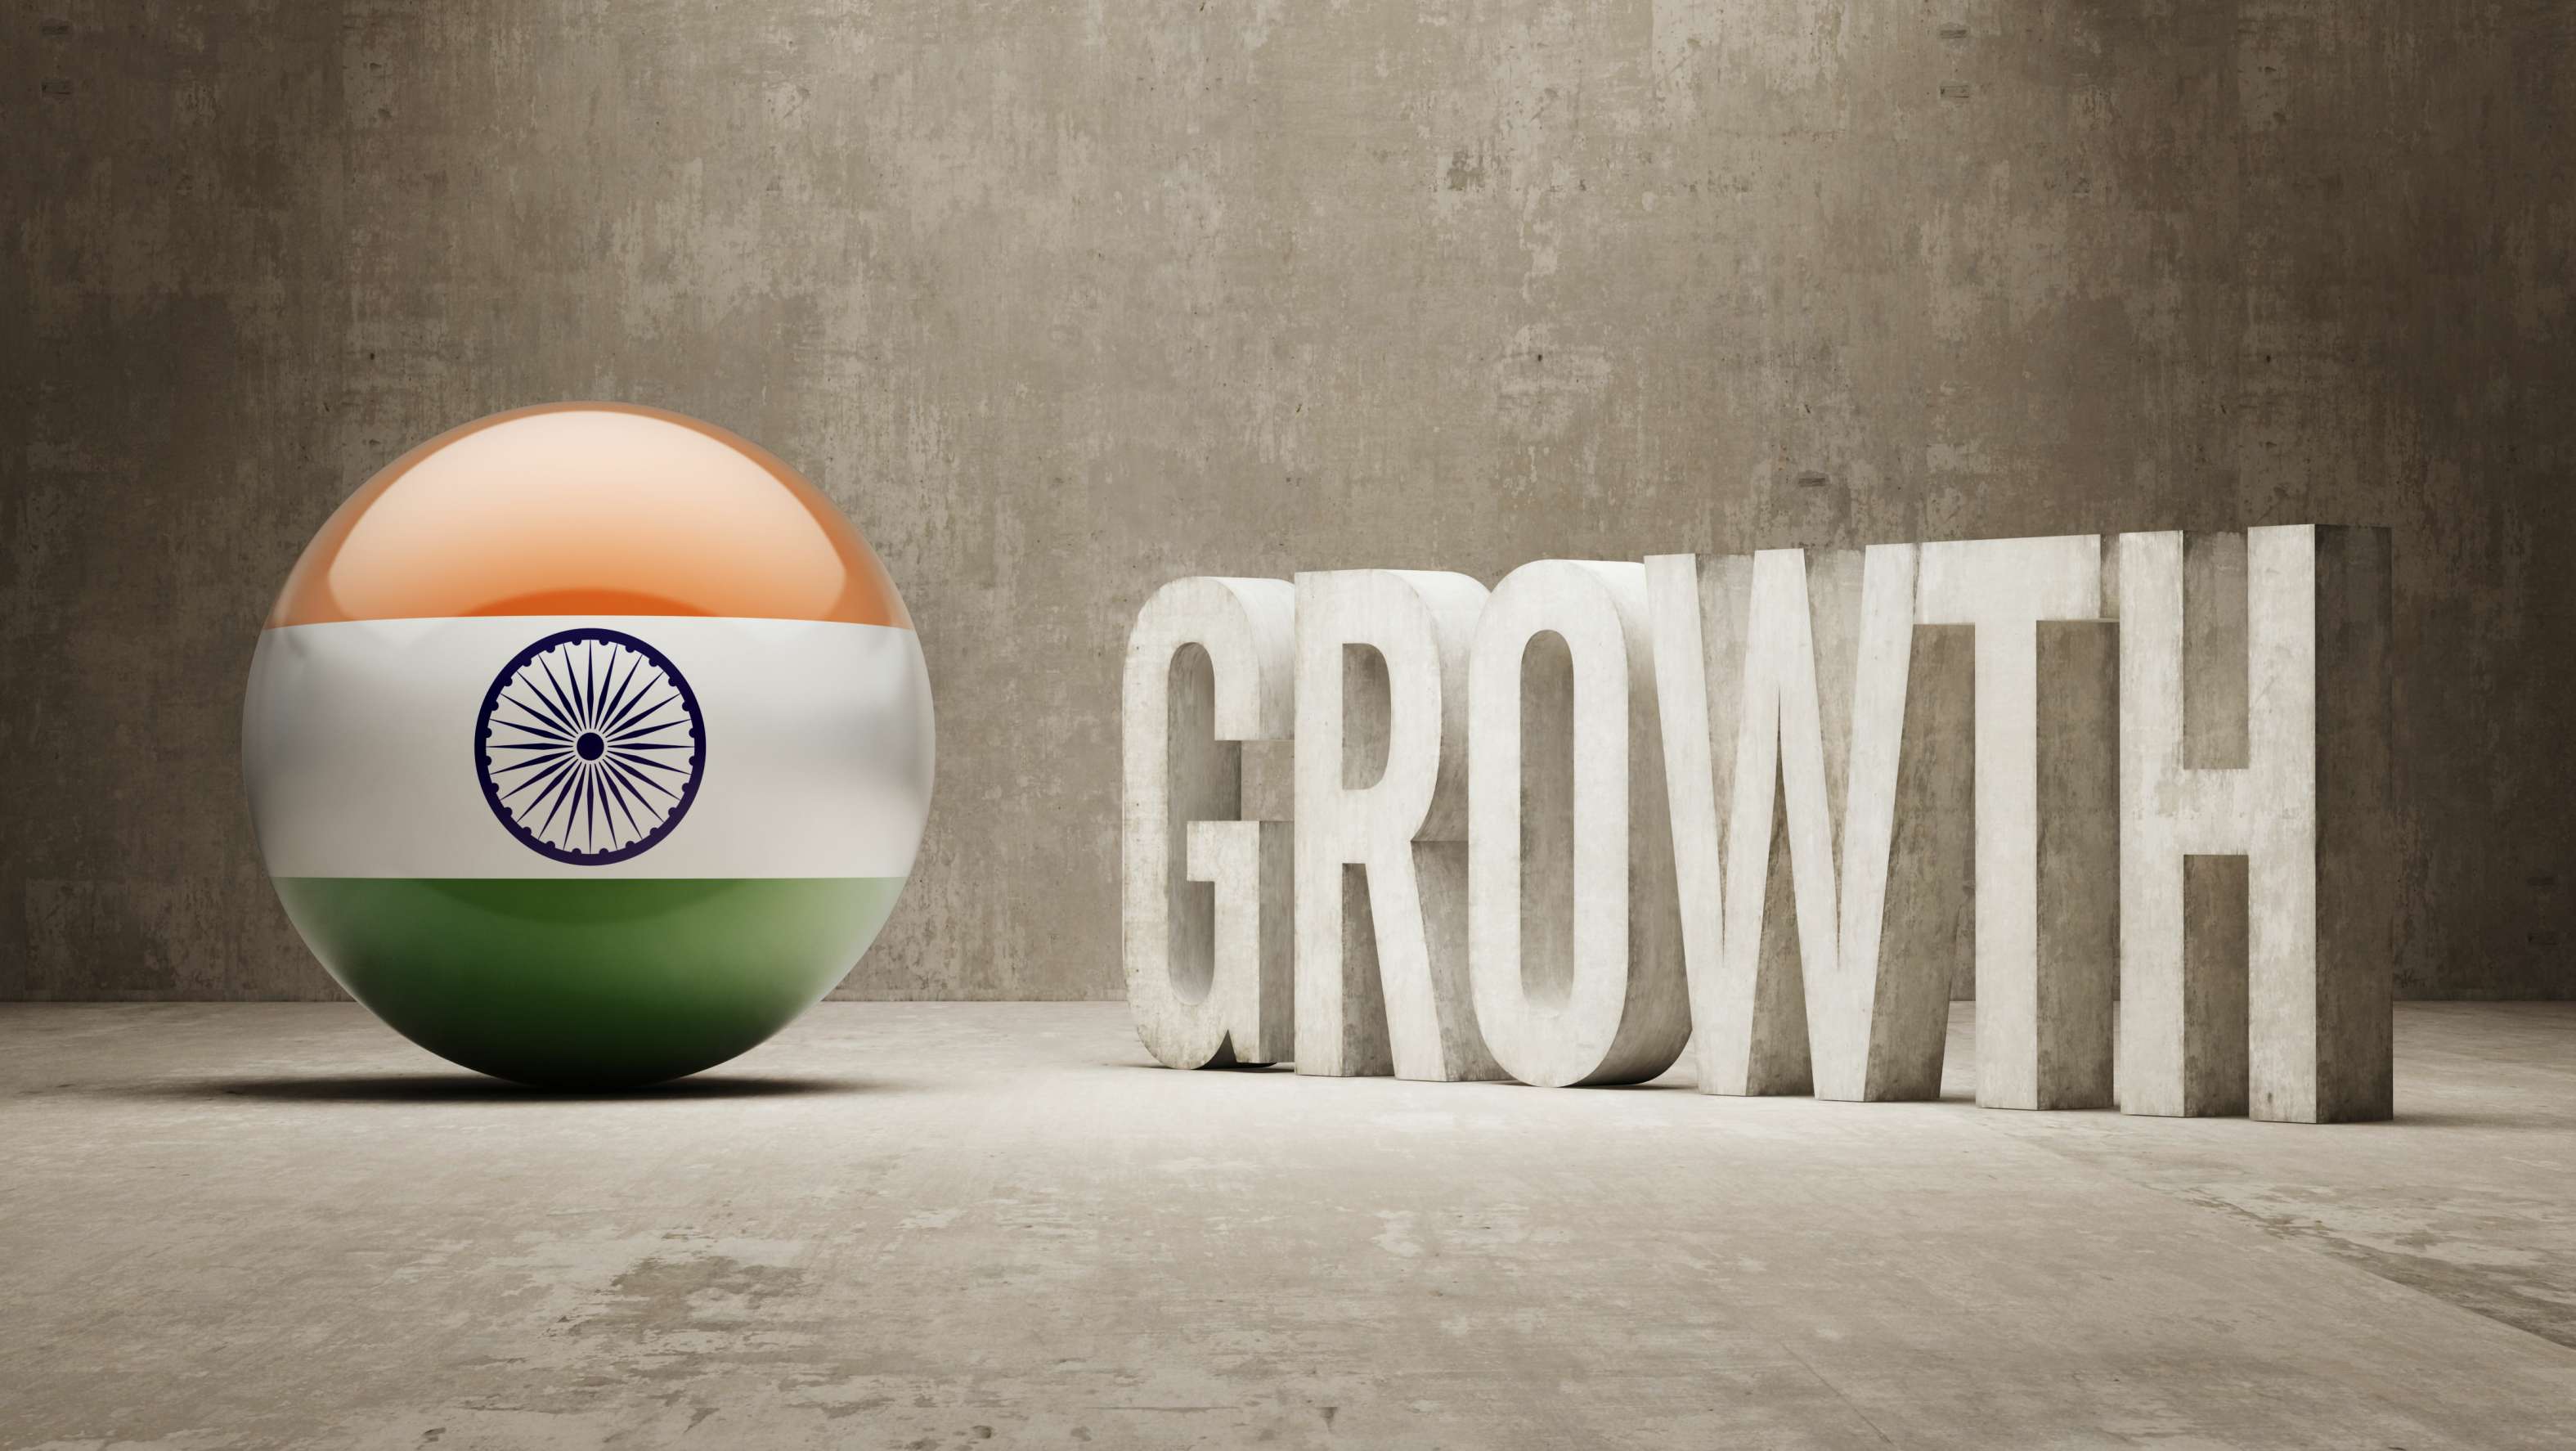 India emerges as an economic superpower